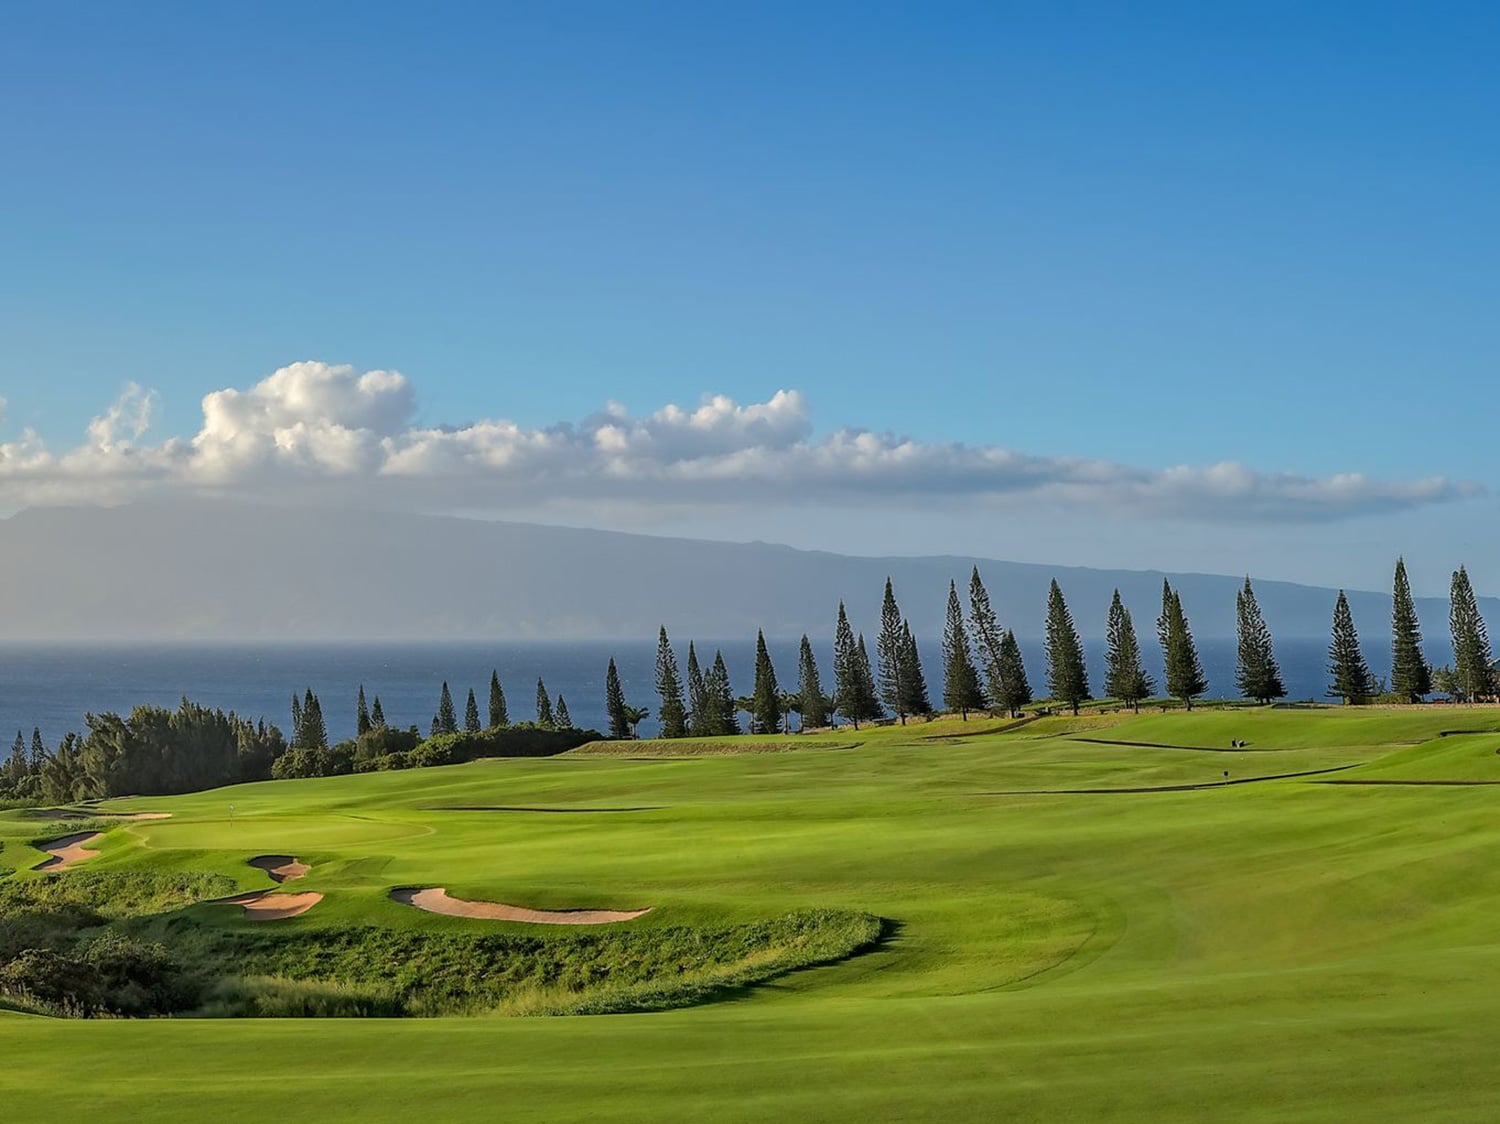 One of the scenic holes of the Plantation Course at The Ritz-Carlton Maui, Kapalua, in Hawaii.